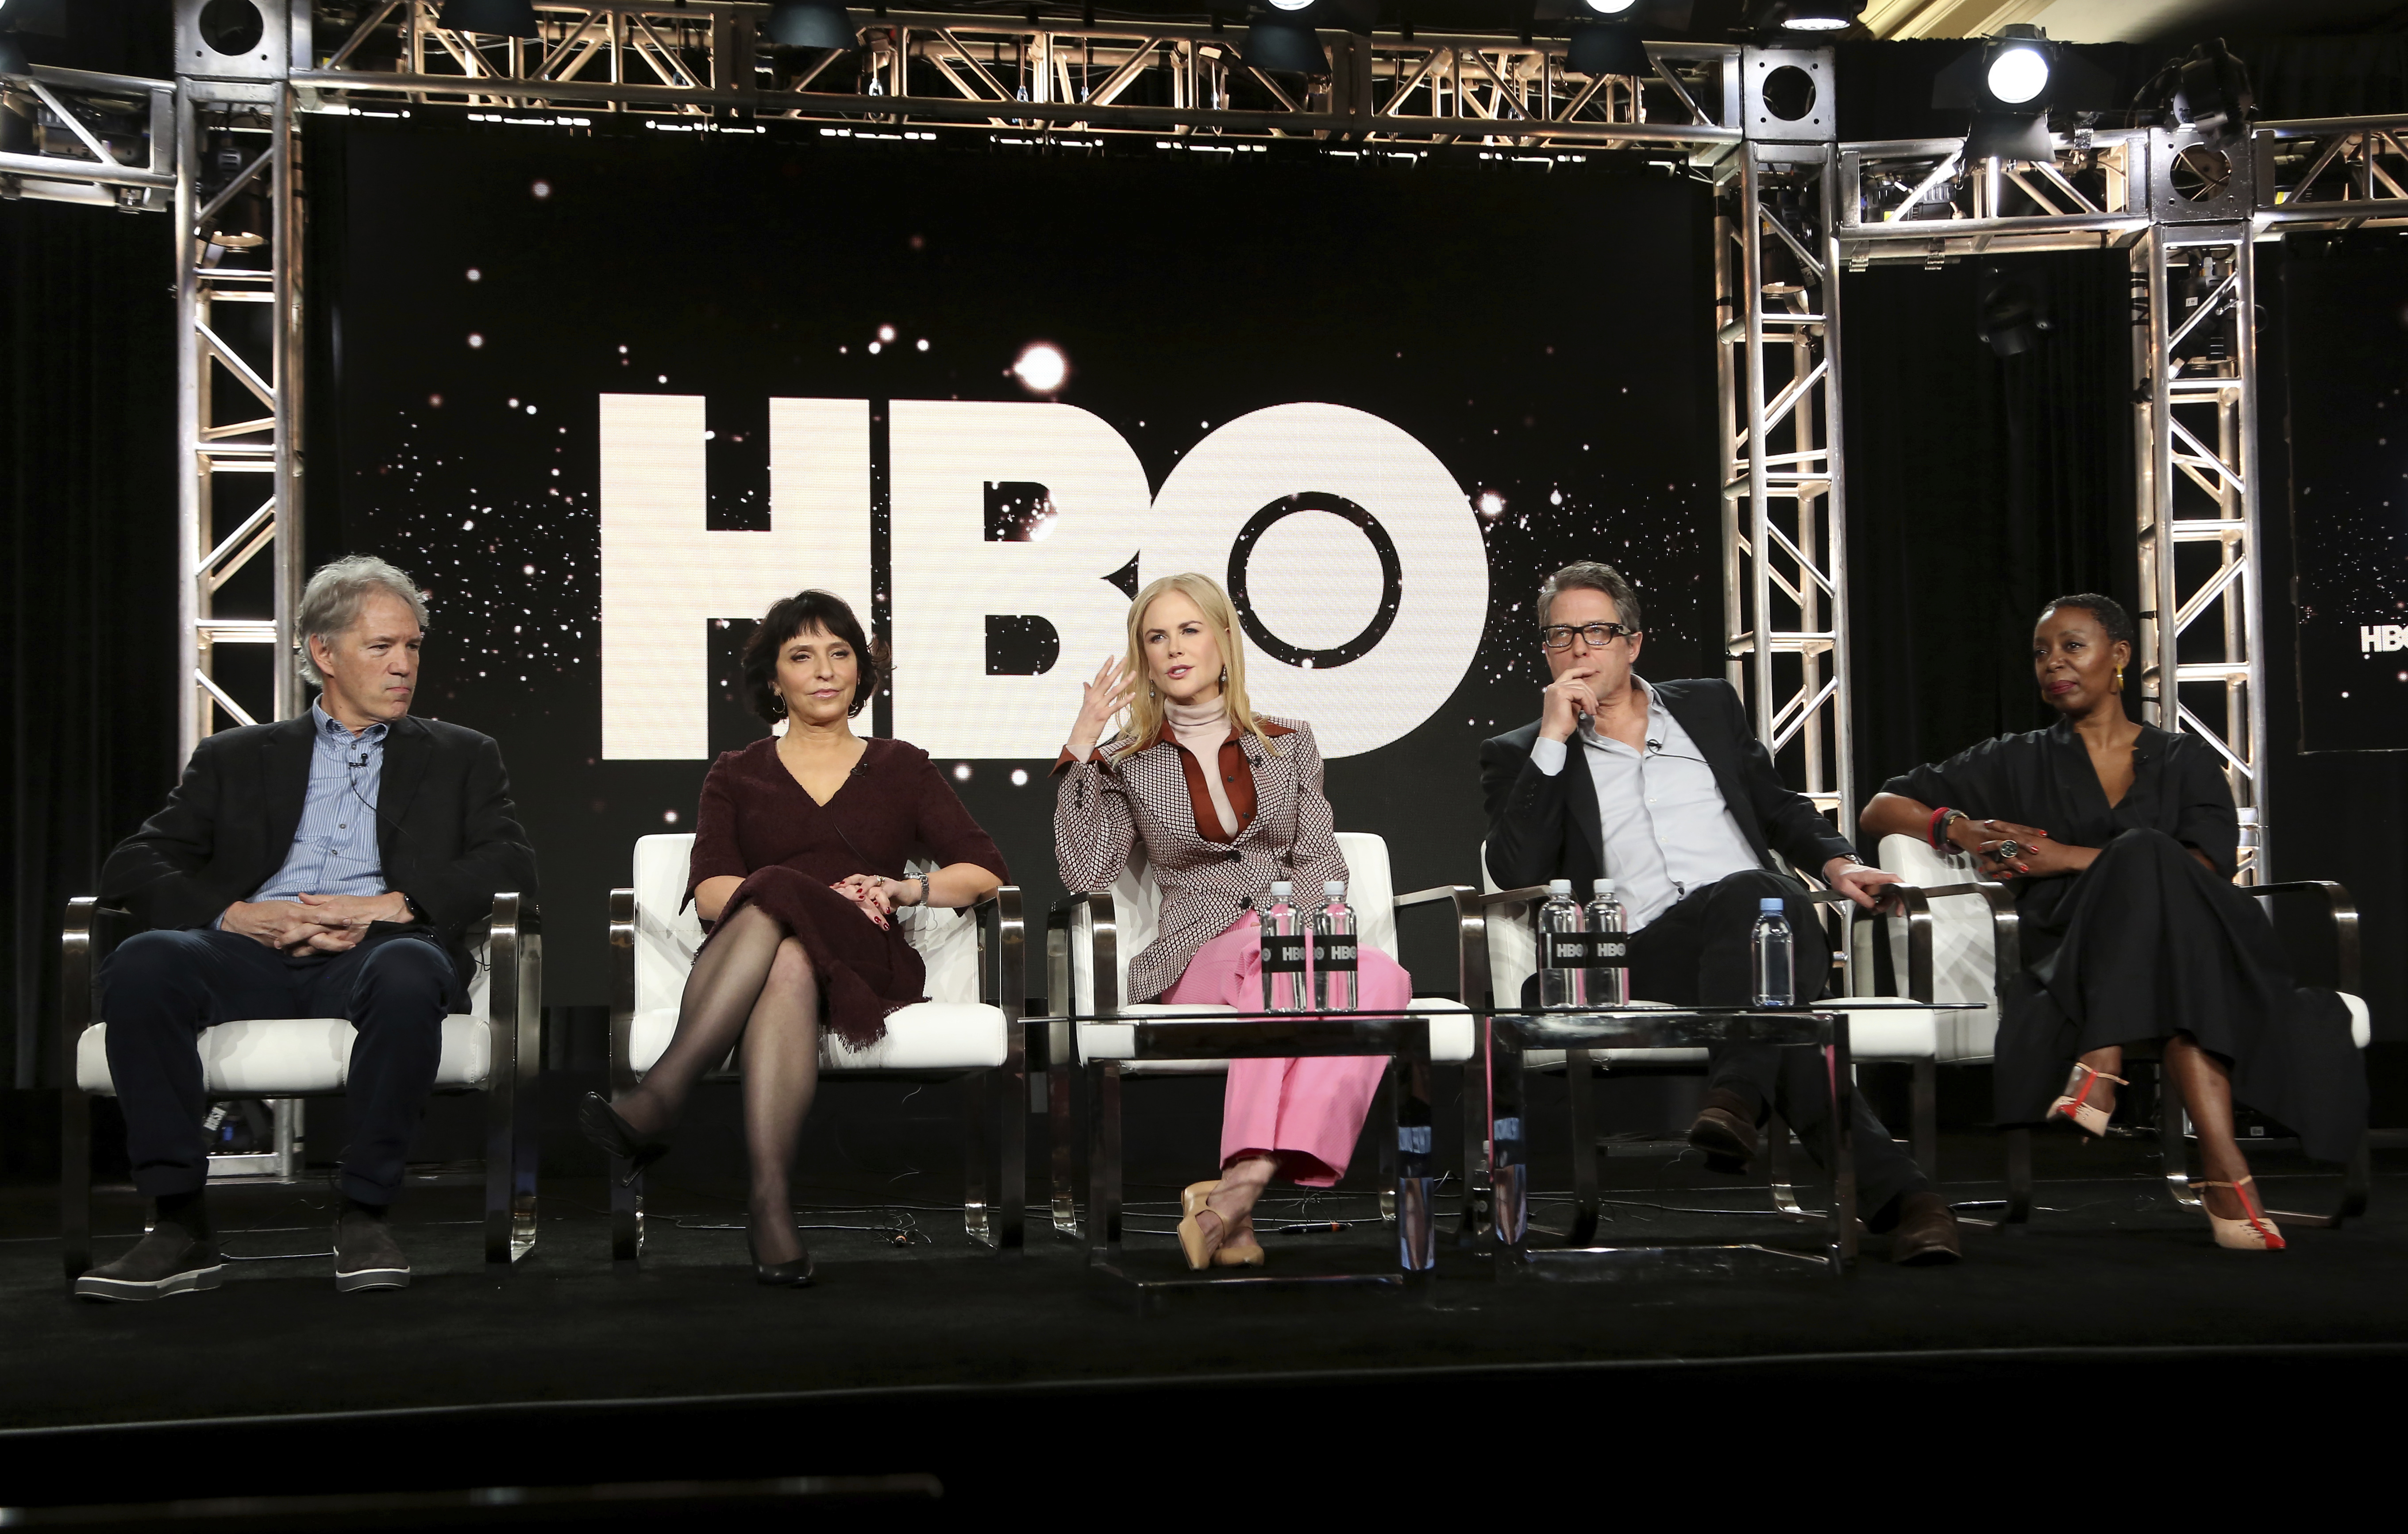 David E. Kelley, from left, Susanne Bier, Nicole Kidman, Hugh Grant and Noma Dumezweni speak at the The Undoing panel during the HBO TCA 2020 Winter Press Tour at the Langham Huntington on Wednesday, Jan. 15, 2020, in Pasadena, Calif. (Photo by Willy Sanjuan/Invision/AP)